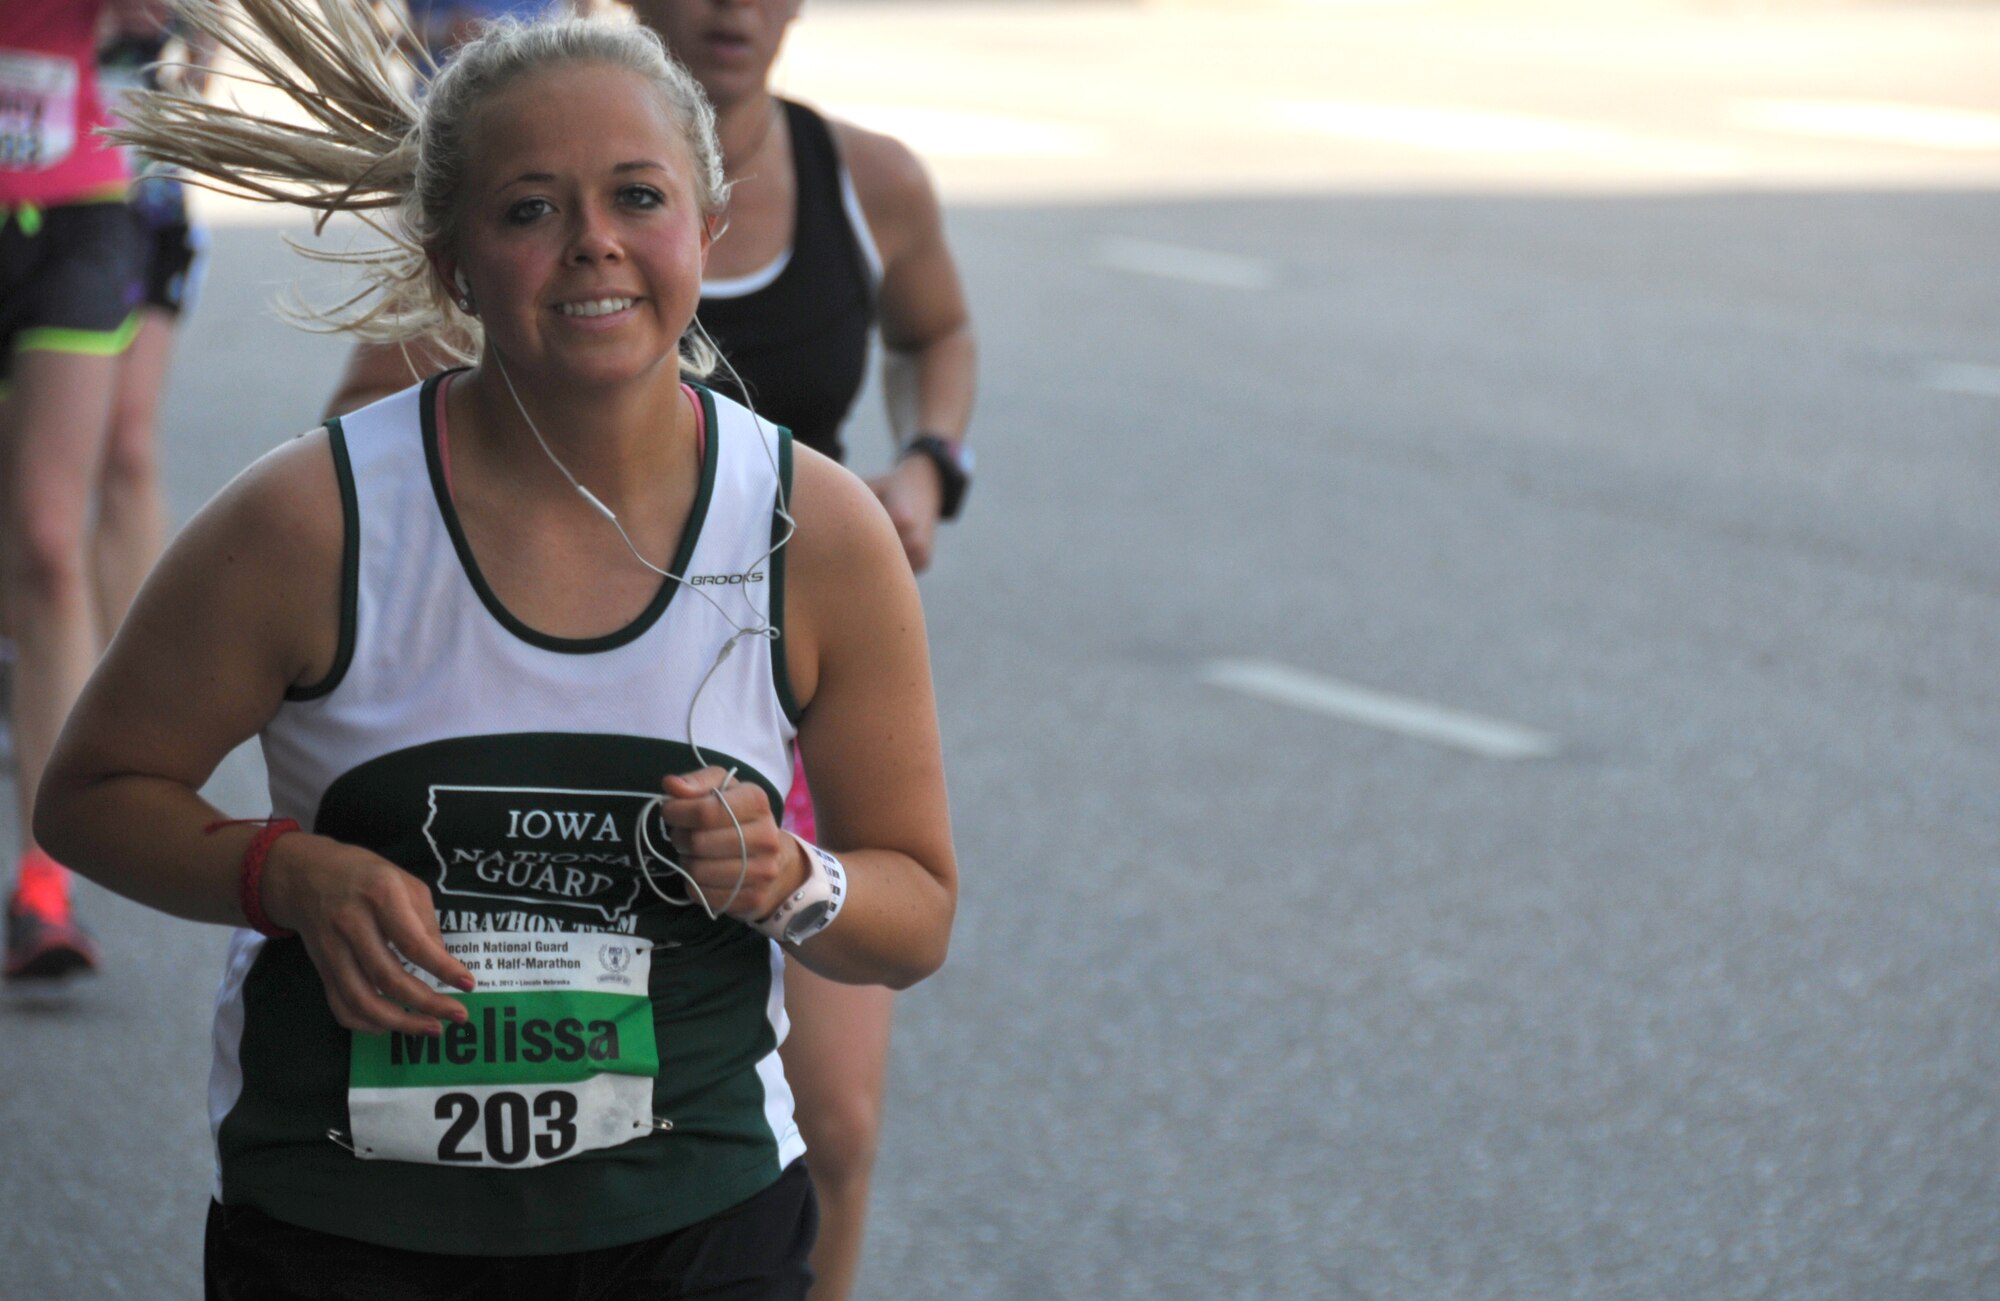 Tech Sgt. Melissa Knight, member of the 185th Air Refueling Wing, Sioux City, Iowa, completes the first half of the Lincoln National Guard Marathon on May, 6, 2012. Knight has represented the Iowa National Guard Marathon Team since 2008. (Air Force Photo by TSgt Richard Murphy. Released.)